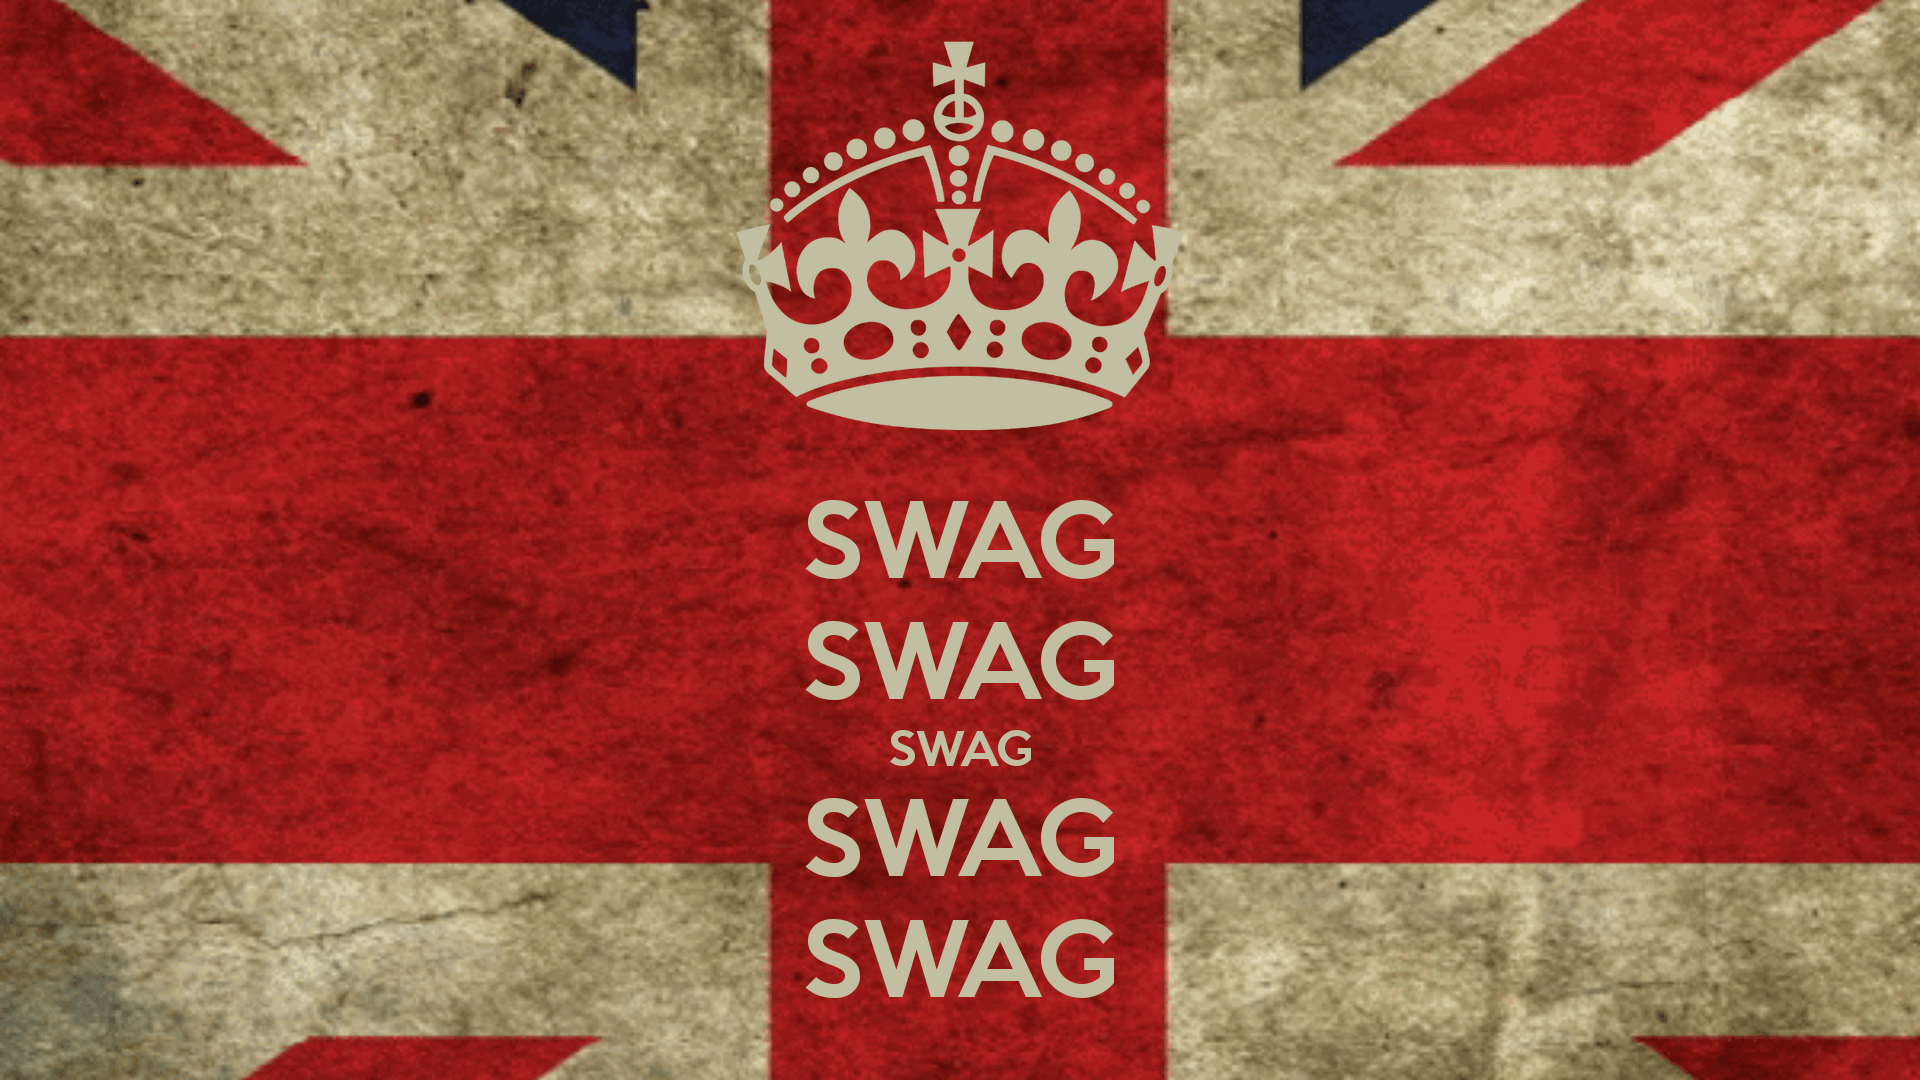 SWAG picture, photo and SWAG style wallpaper